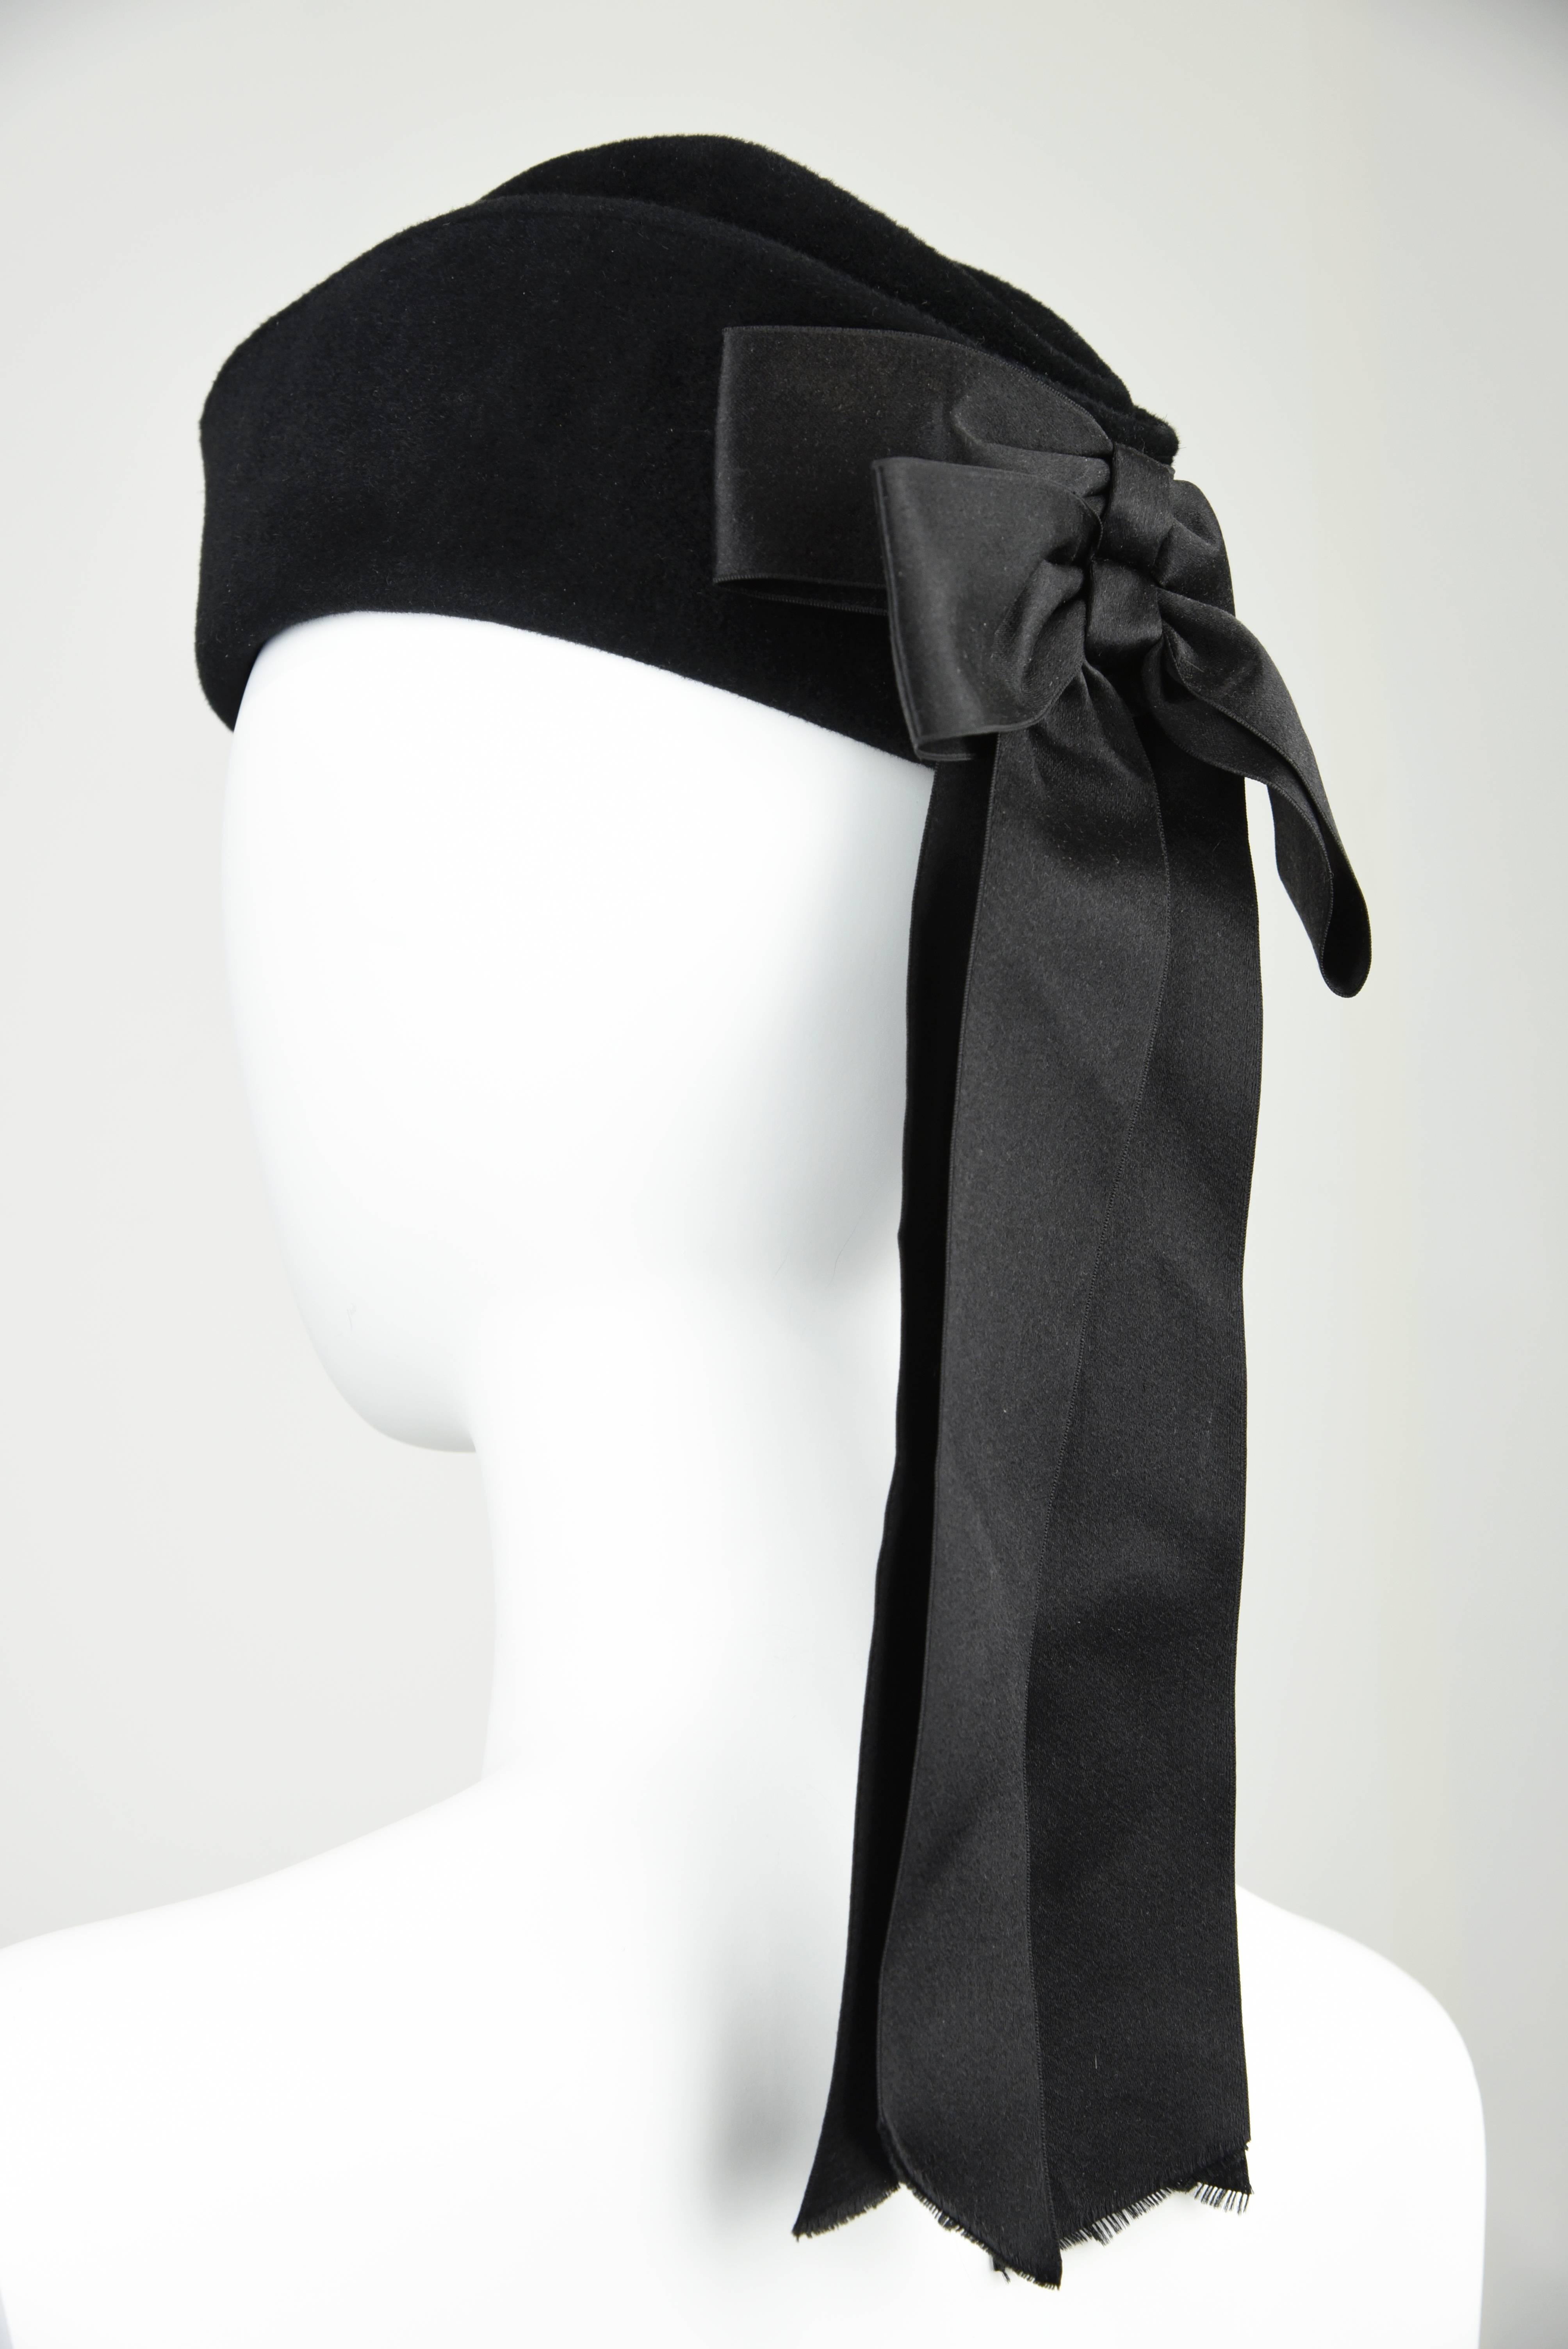 1988A Black Felt Hat With Double Black Satin Bow and Ribbons, Size 58 In Excellent Condition For Sale In Portland, OR